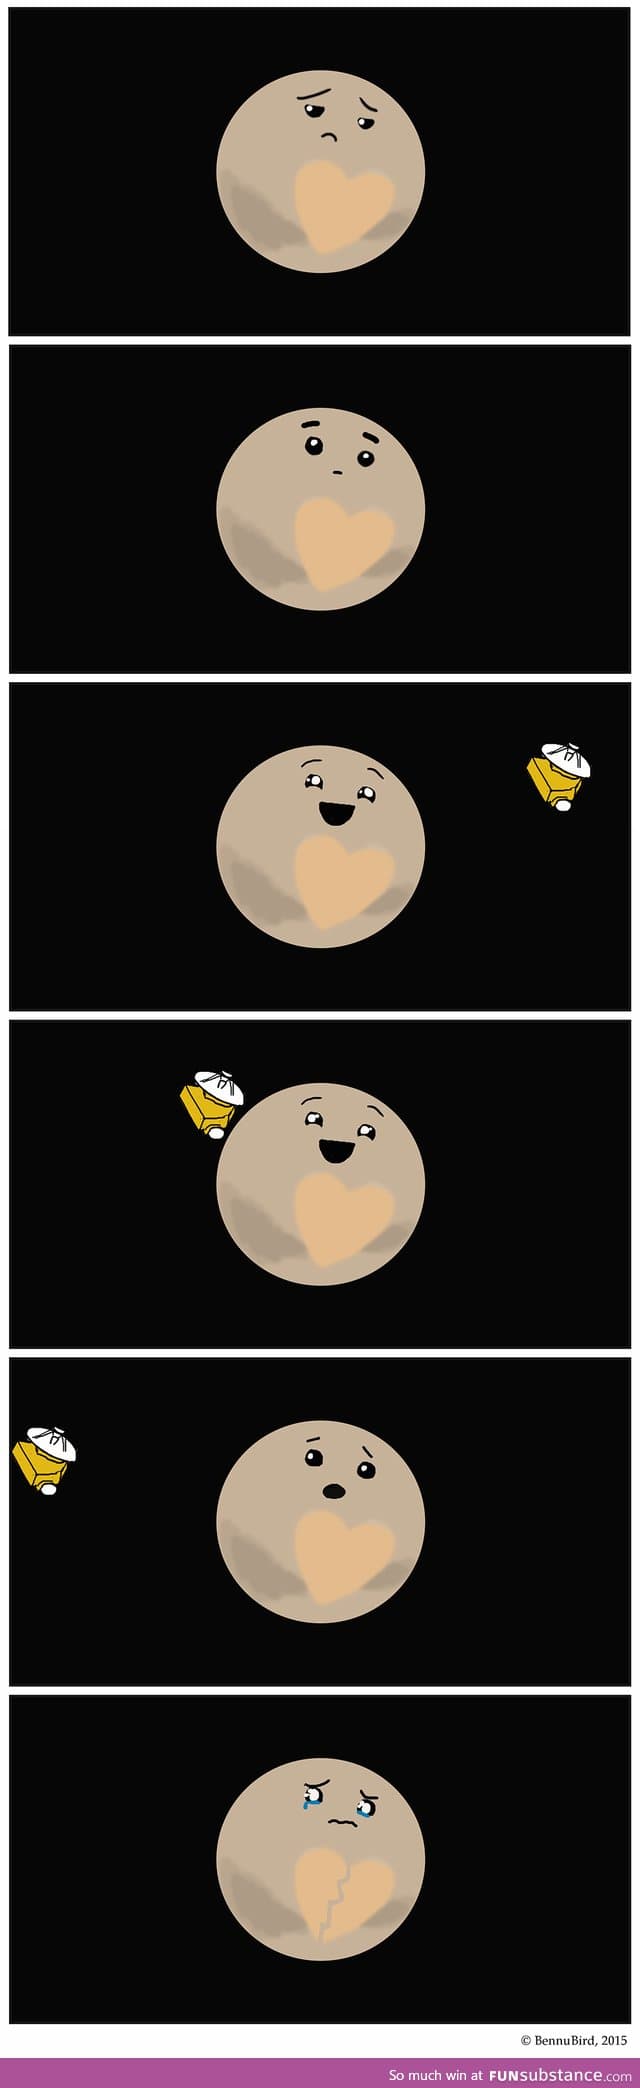 Pluto is adorable